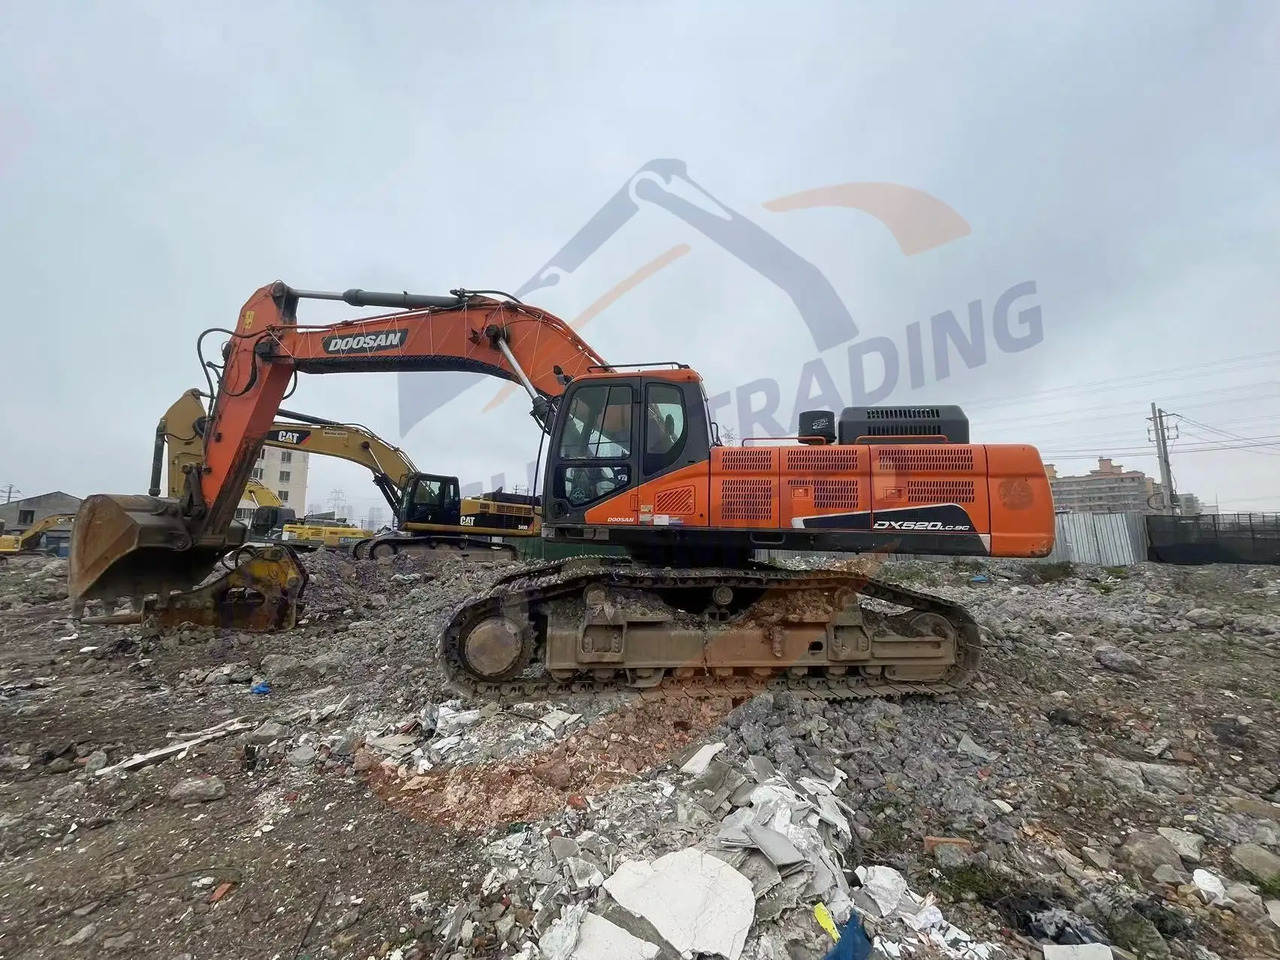 Pelle sur chenille new arrival Used Doosan excavator DX520LC-9C in good condition for sale in good condition: photos 6